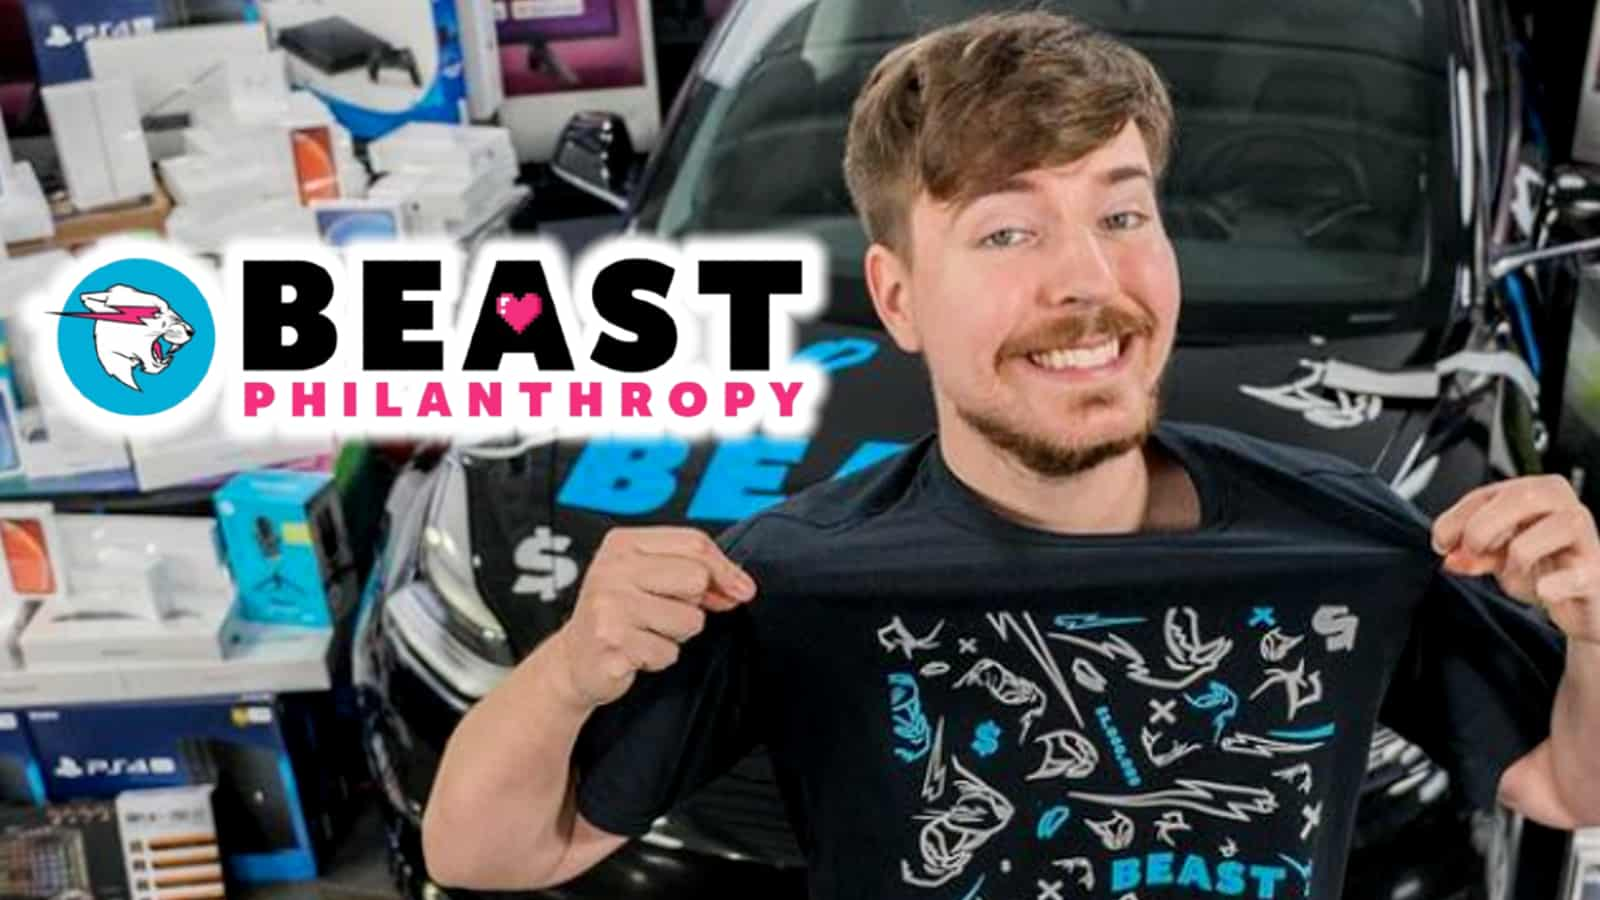 A picture of Jimmy Donaldson, AKA Mr Beast, smiling and showing off one of his merch designs - a black top with white and blue designs in the centre. The logo for his charity, Beast Philanthropy, is to the left of his head.